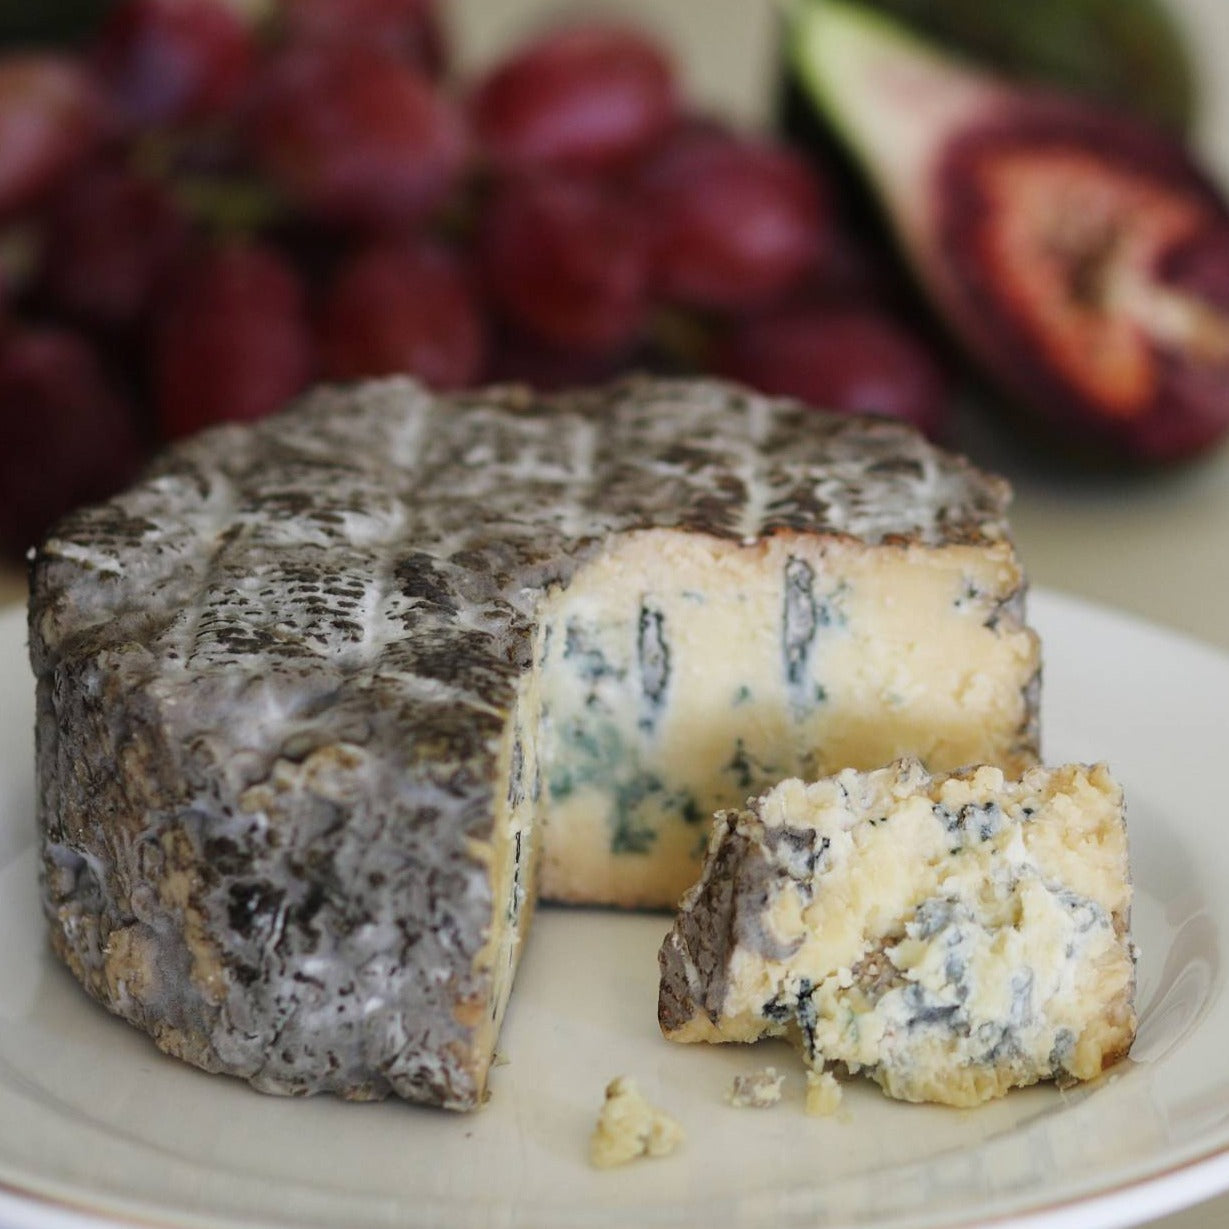 Goodwood's Molecomb Blue soft blue veined cheese, with a dark smoky grey crust, displayed as part of a cheese board.